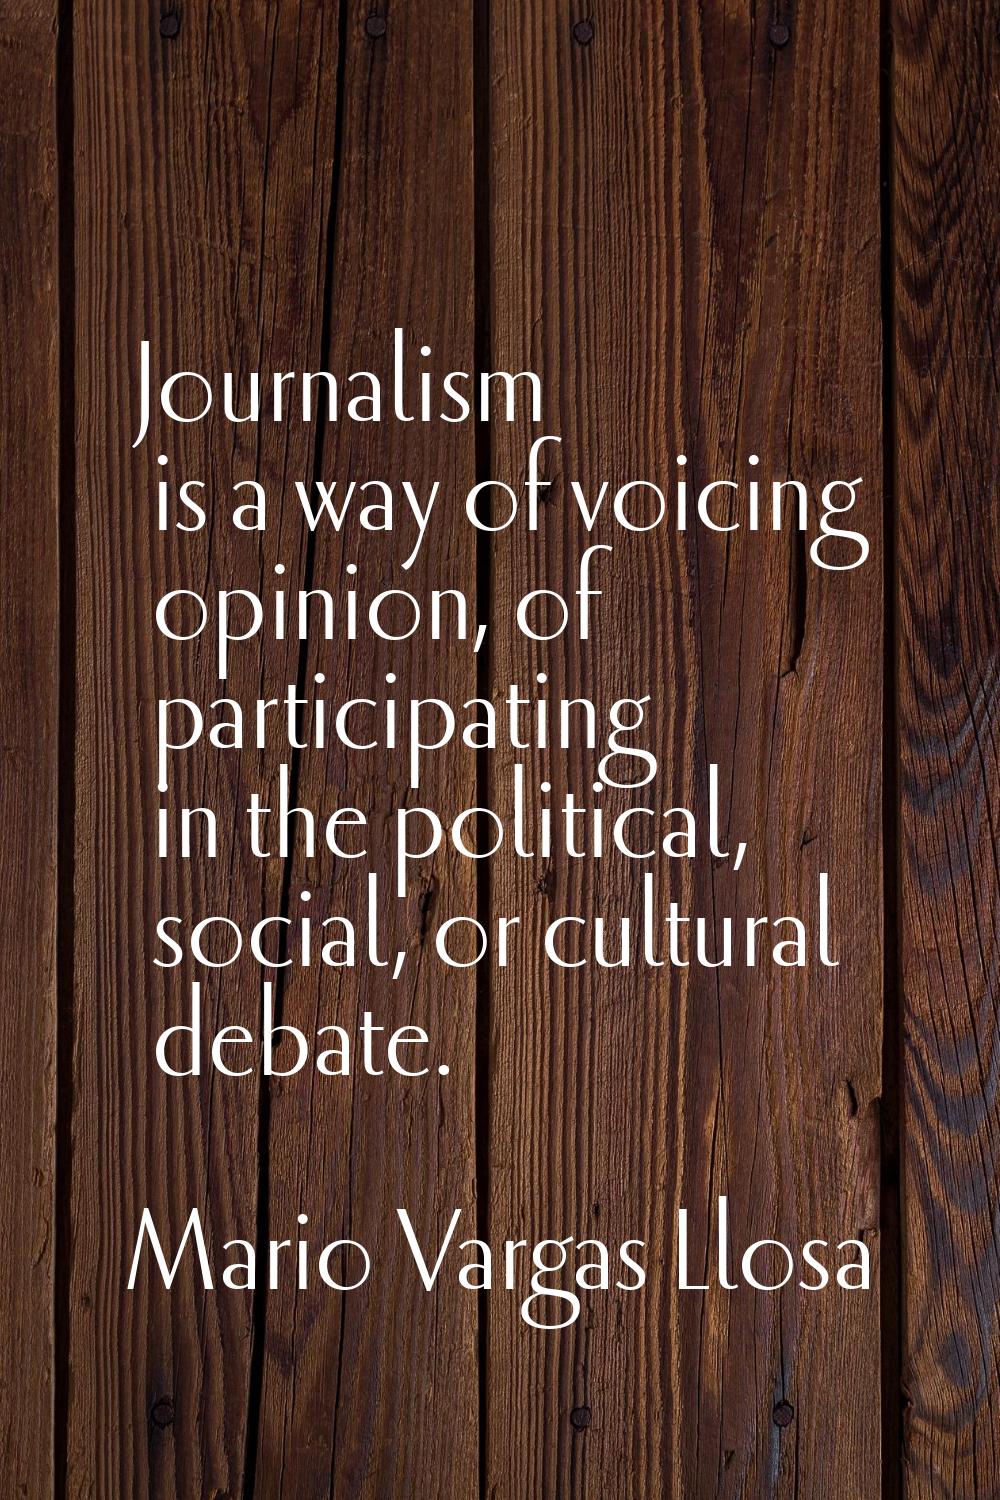 Journalism is a way of voicing opinion, of participating in the political, social, or cultural deba